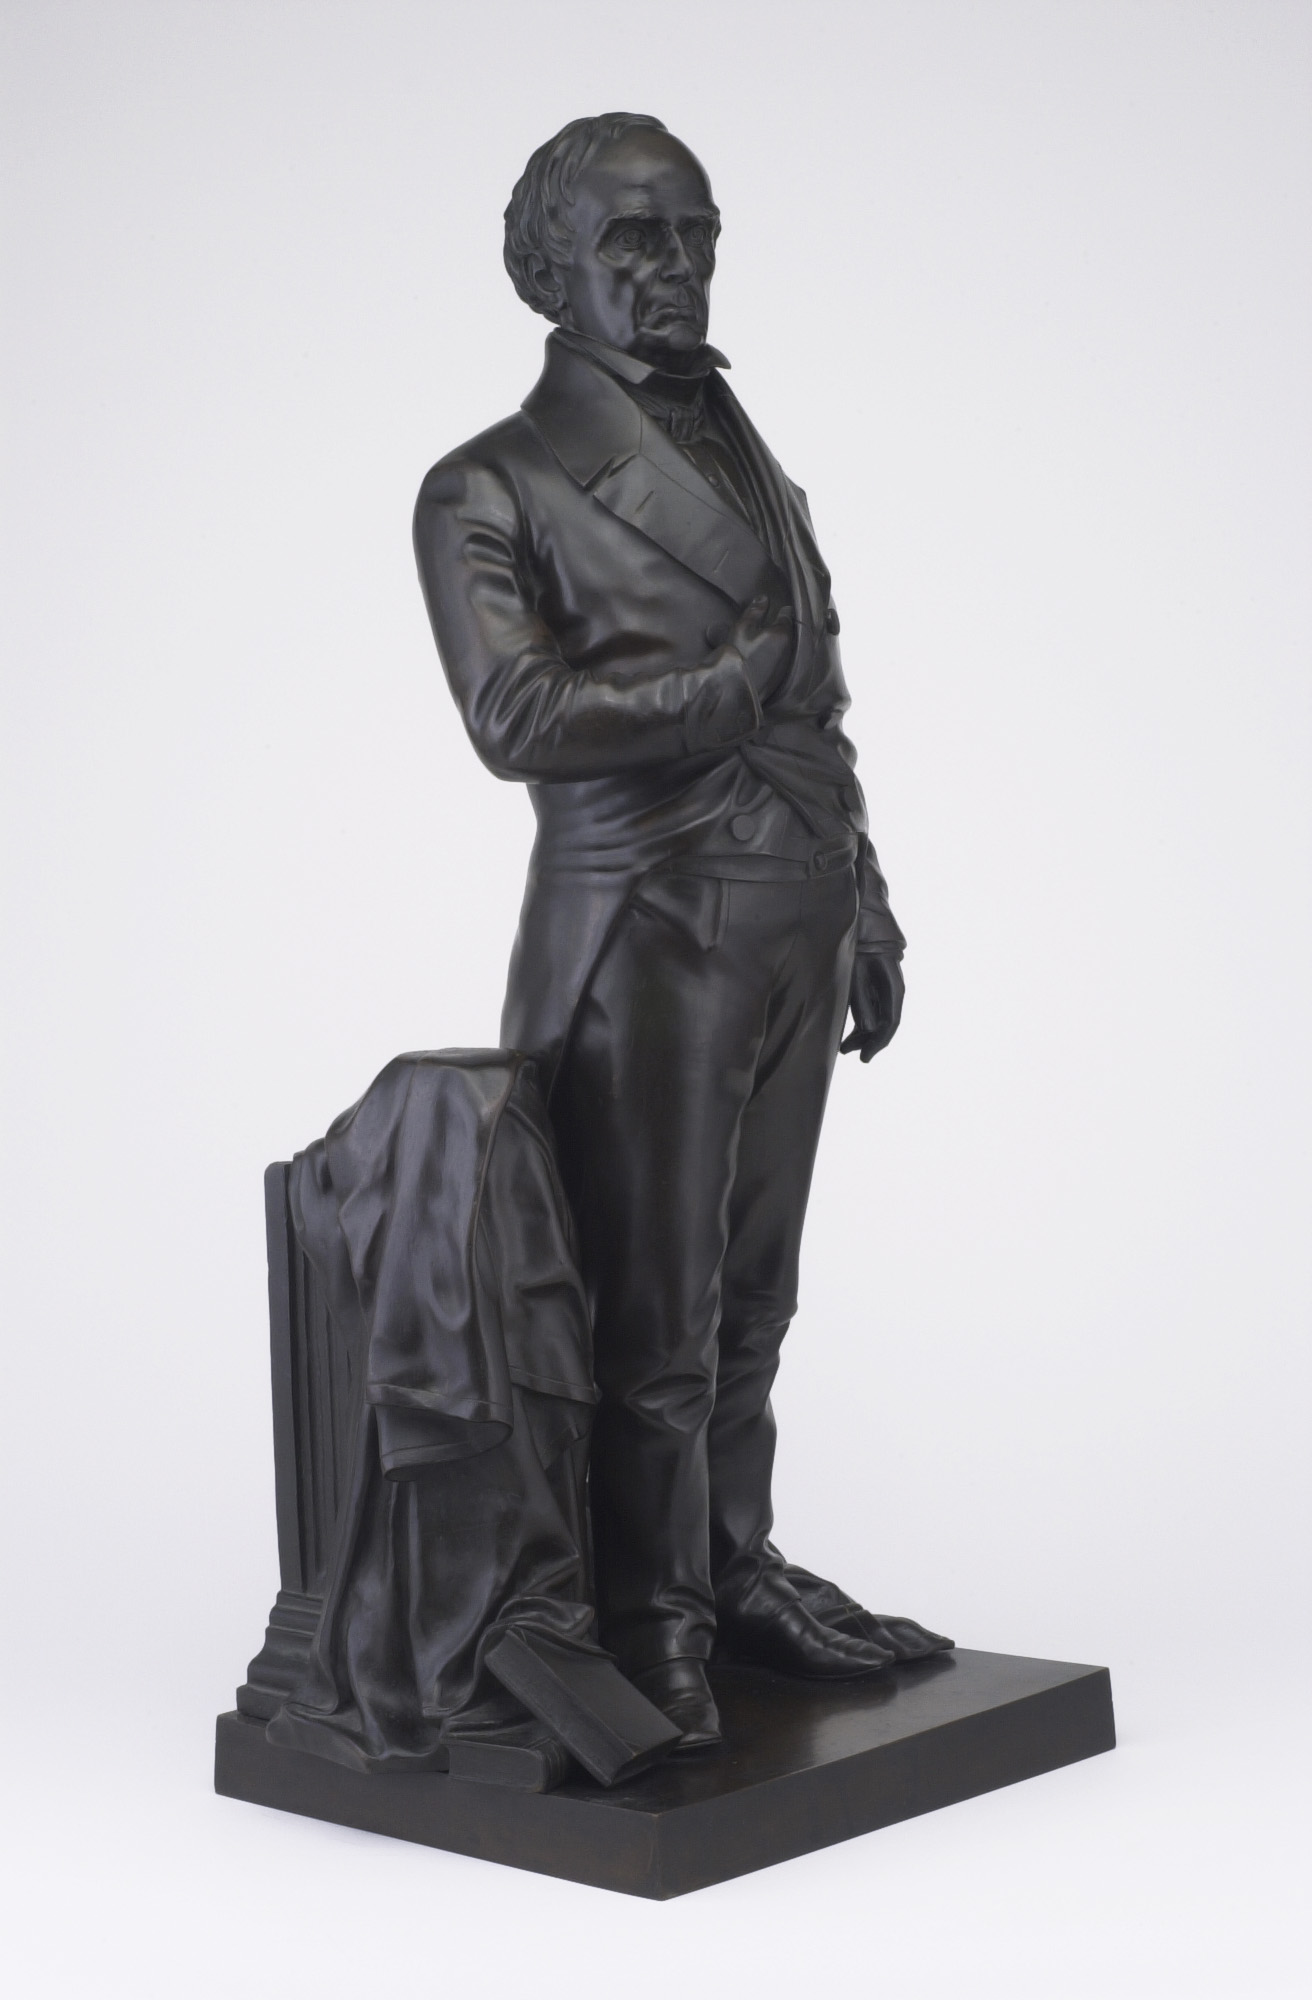 Thomas Ball, Daniel Webster, 1853, bronze, 30 x 12 x 11 inches (The Art Institute of Chicago)